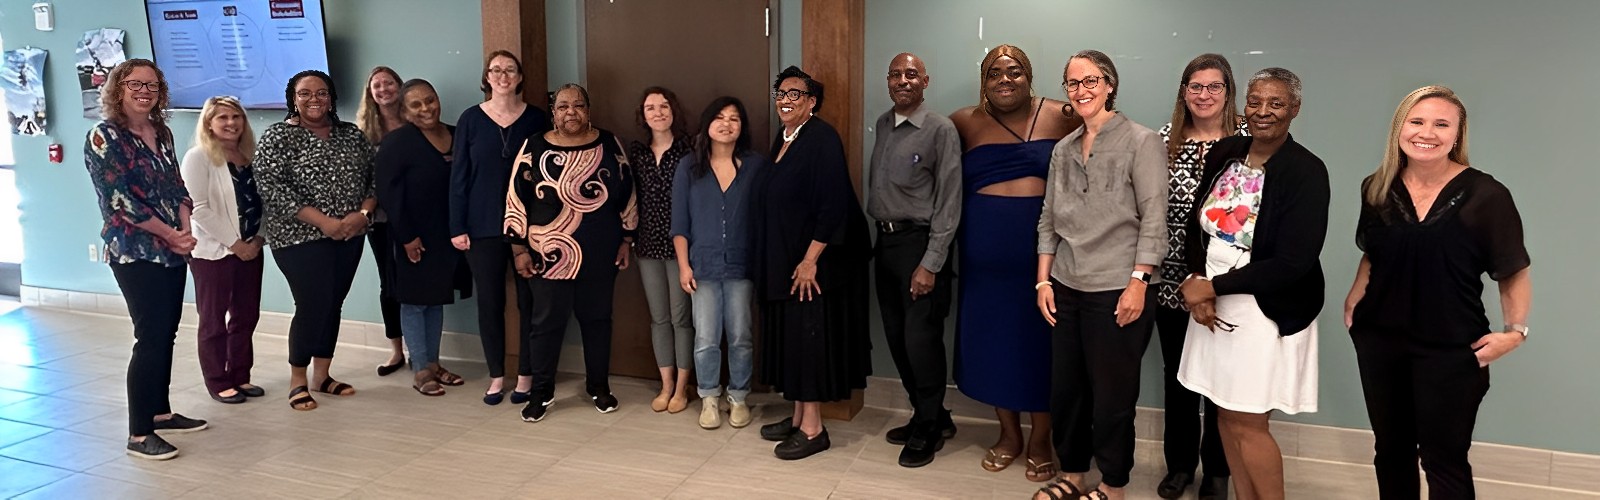 Colleagues from the Milwaukee Community Advisory Board, UW-CTRI, the Wisconsin Department of Health Services and other stakeholders met in Milwaukee to discuss ways to help African Americans who want to quit tobacco use to succeed.